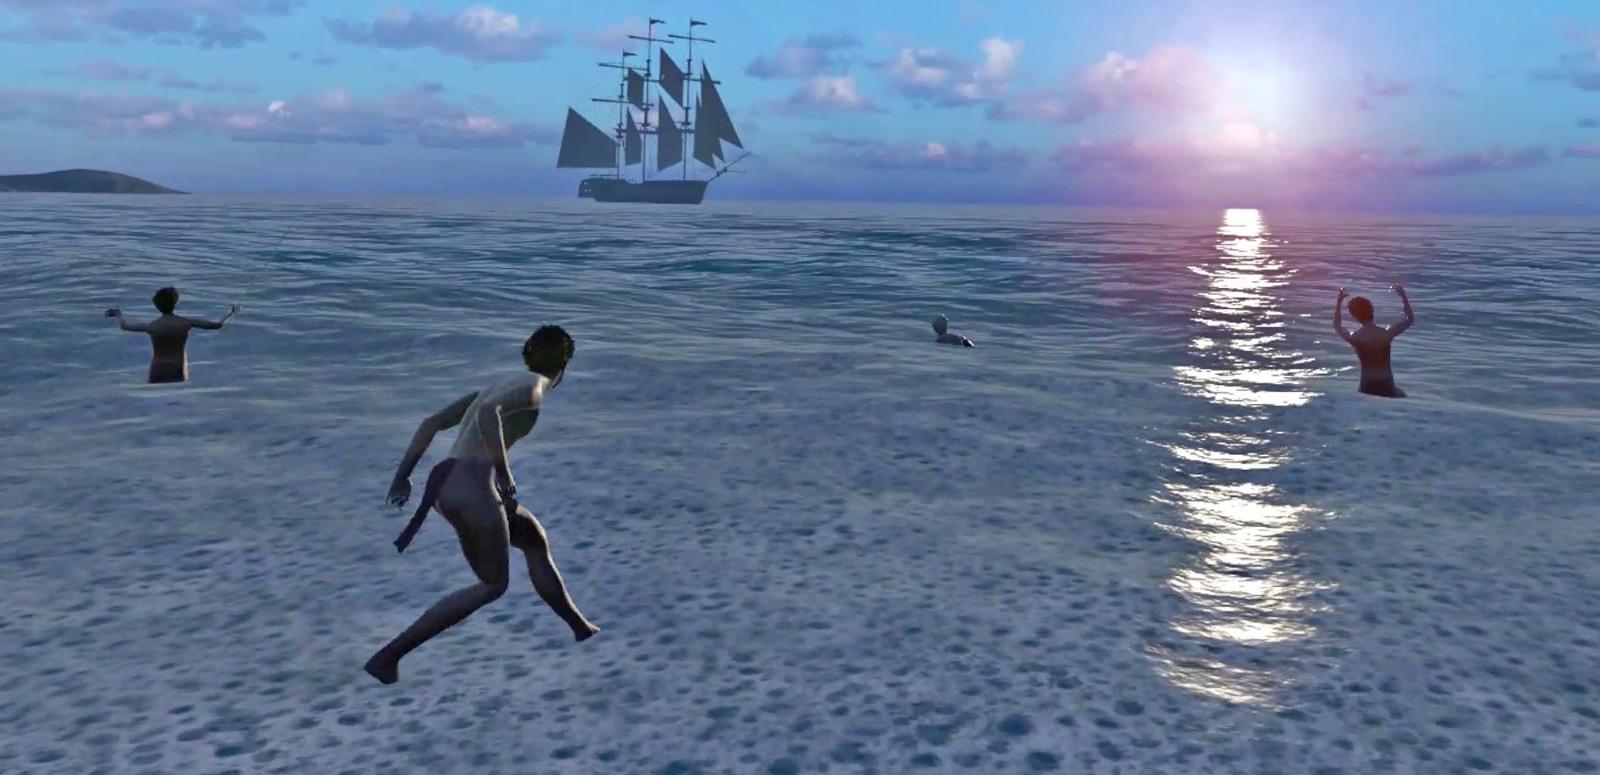 Still frame from virtual reality production Whadjuk showing Aboriginal men in the water and a ship on the horizon